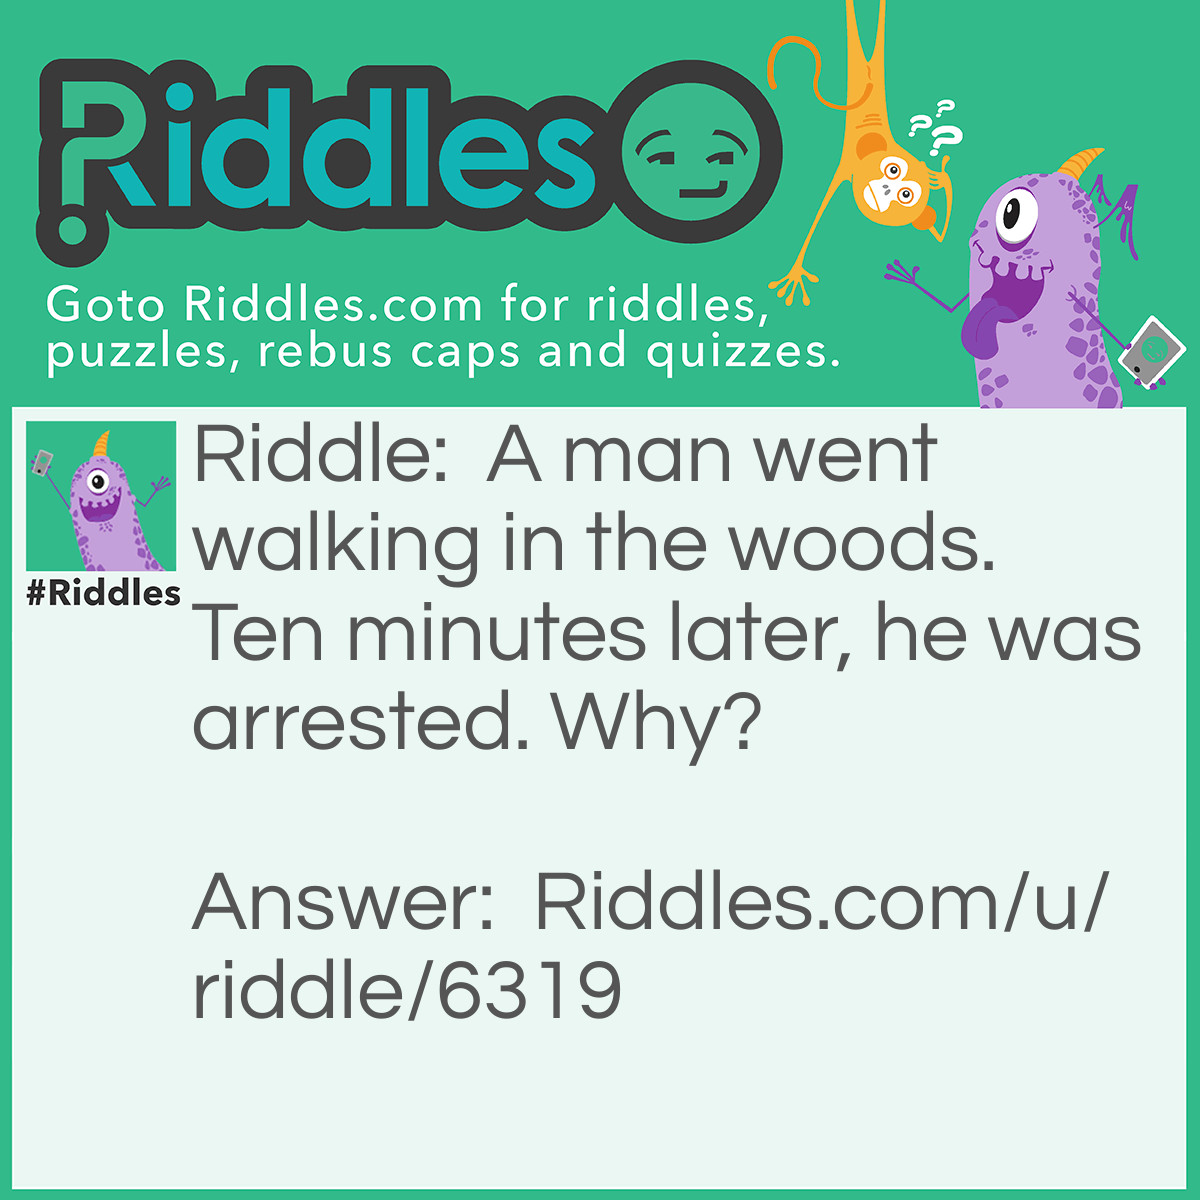 Riddle: A man went walking in the woods. Ten minutes later, he was arrested. Why? Answer: He was carrying a gun to protect himself from bears, but he didn't have a permit.